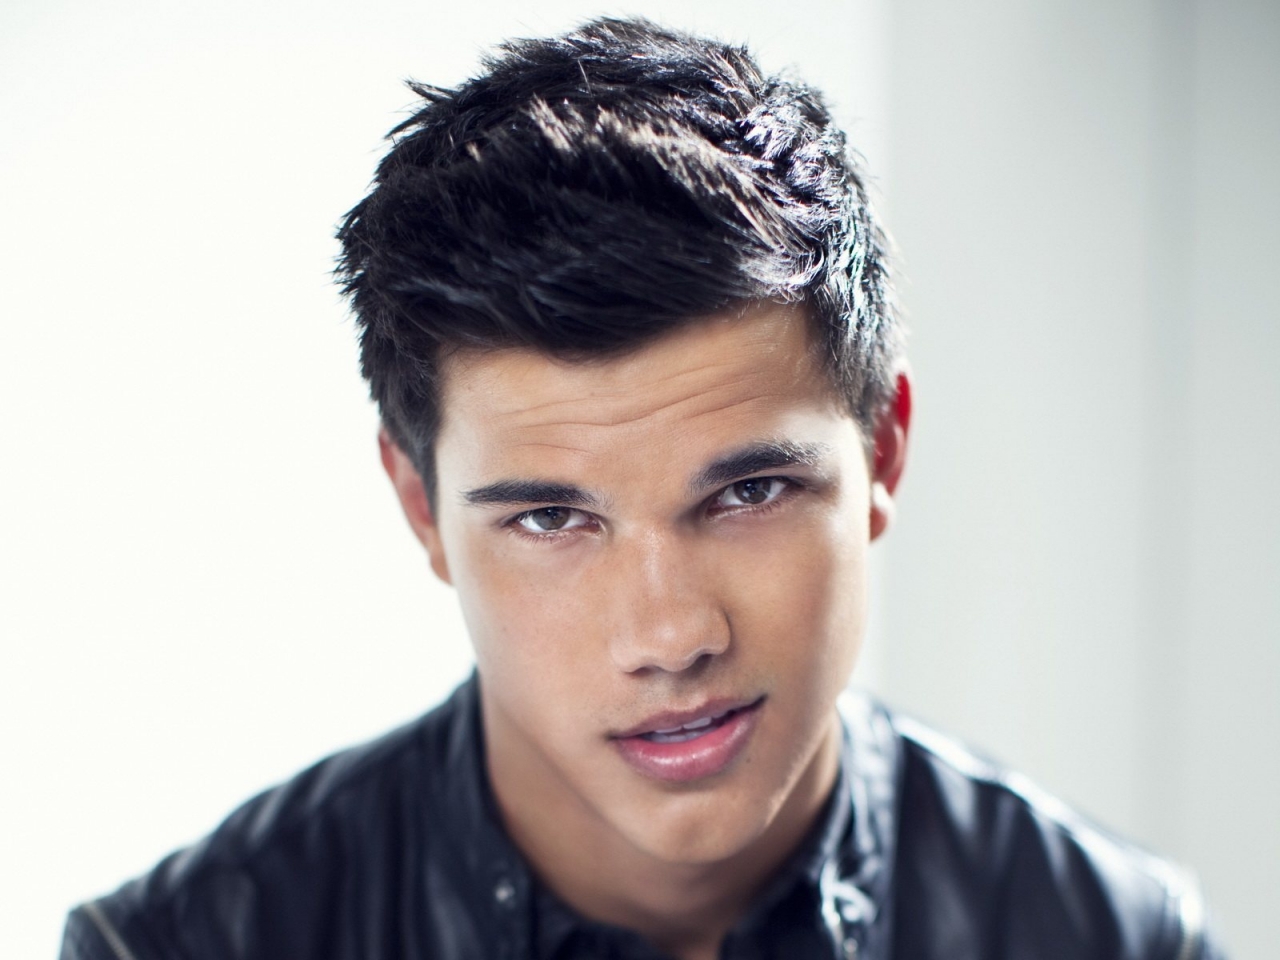 Taylor Lautner Look for 1280 x 960 resolution